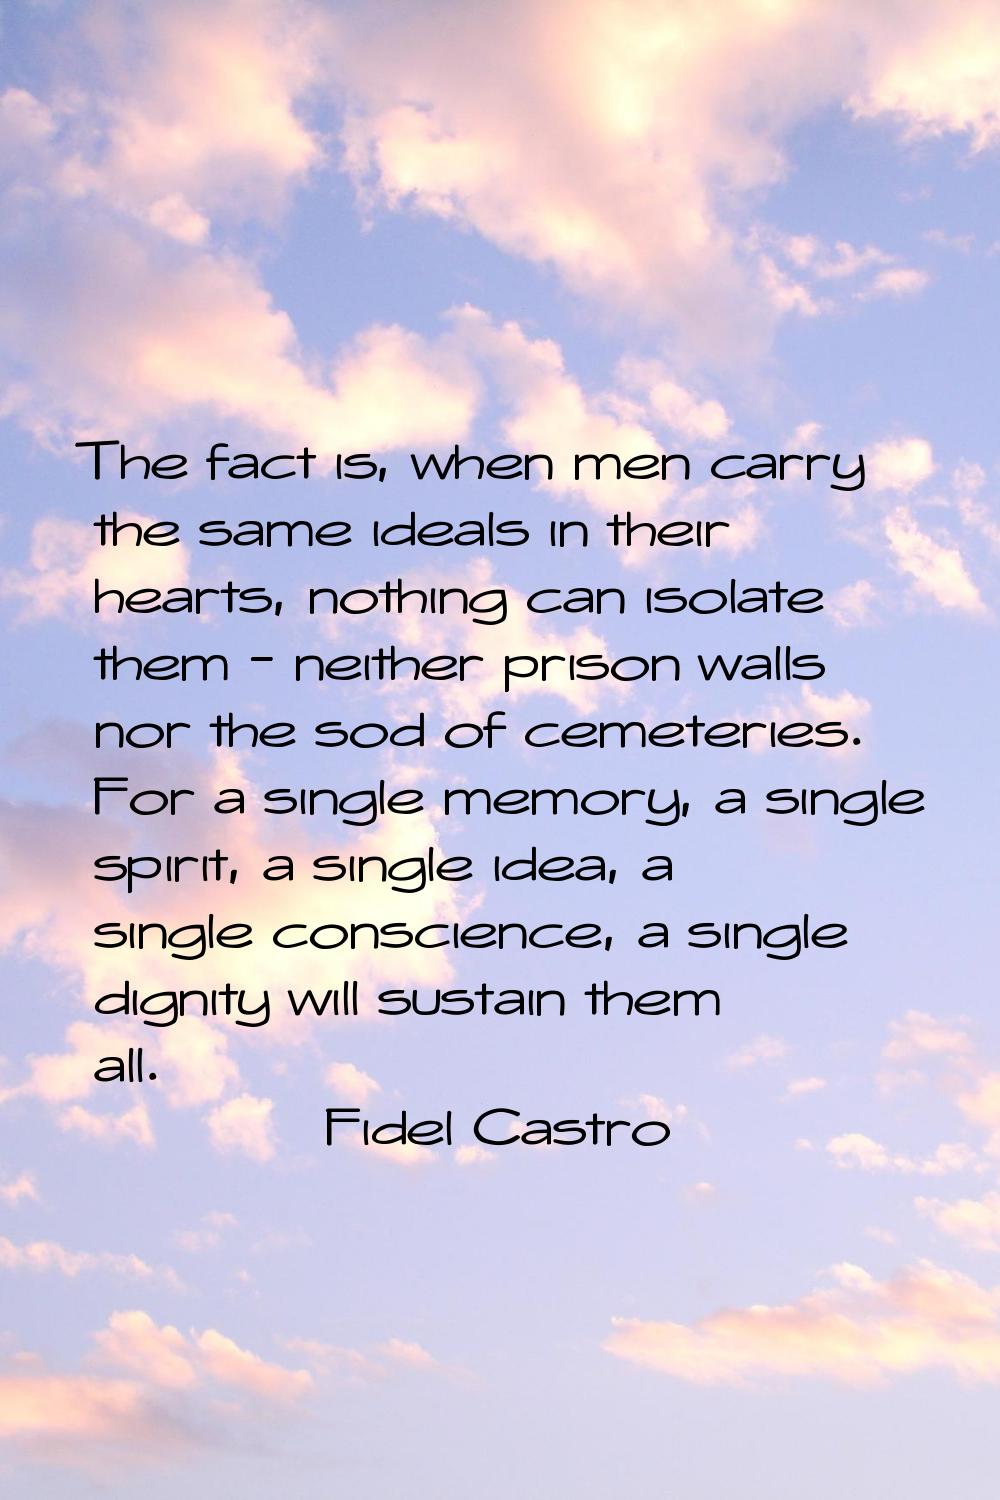 The fact is, when men carry the same ideals in their hearts, nothing can isolate them - neither pri